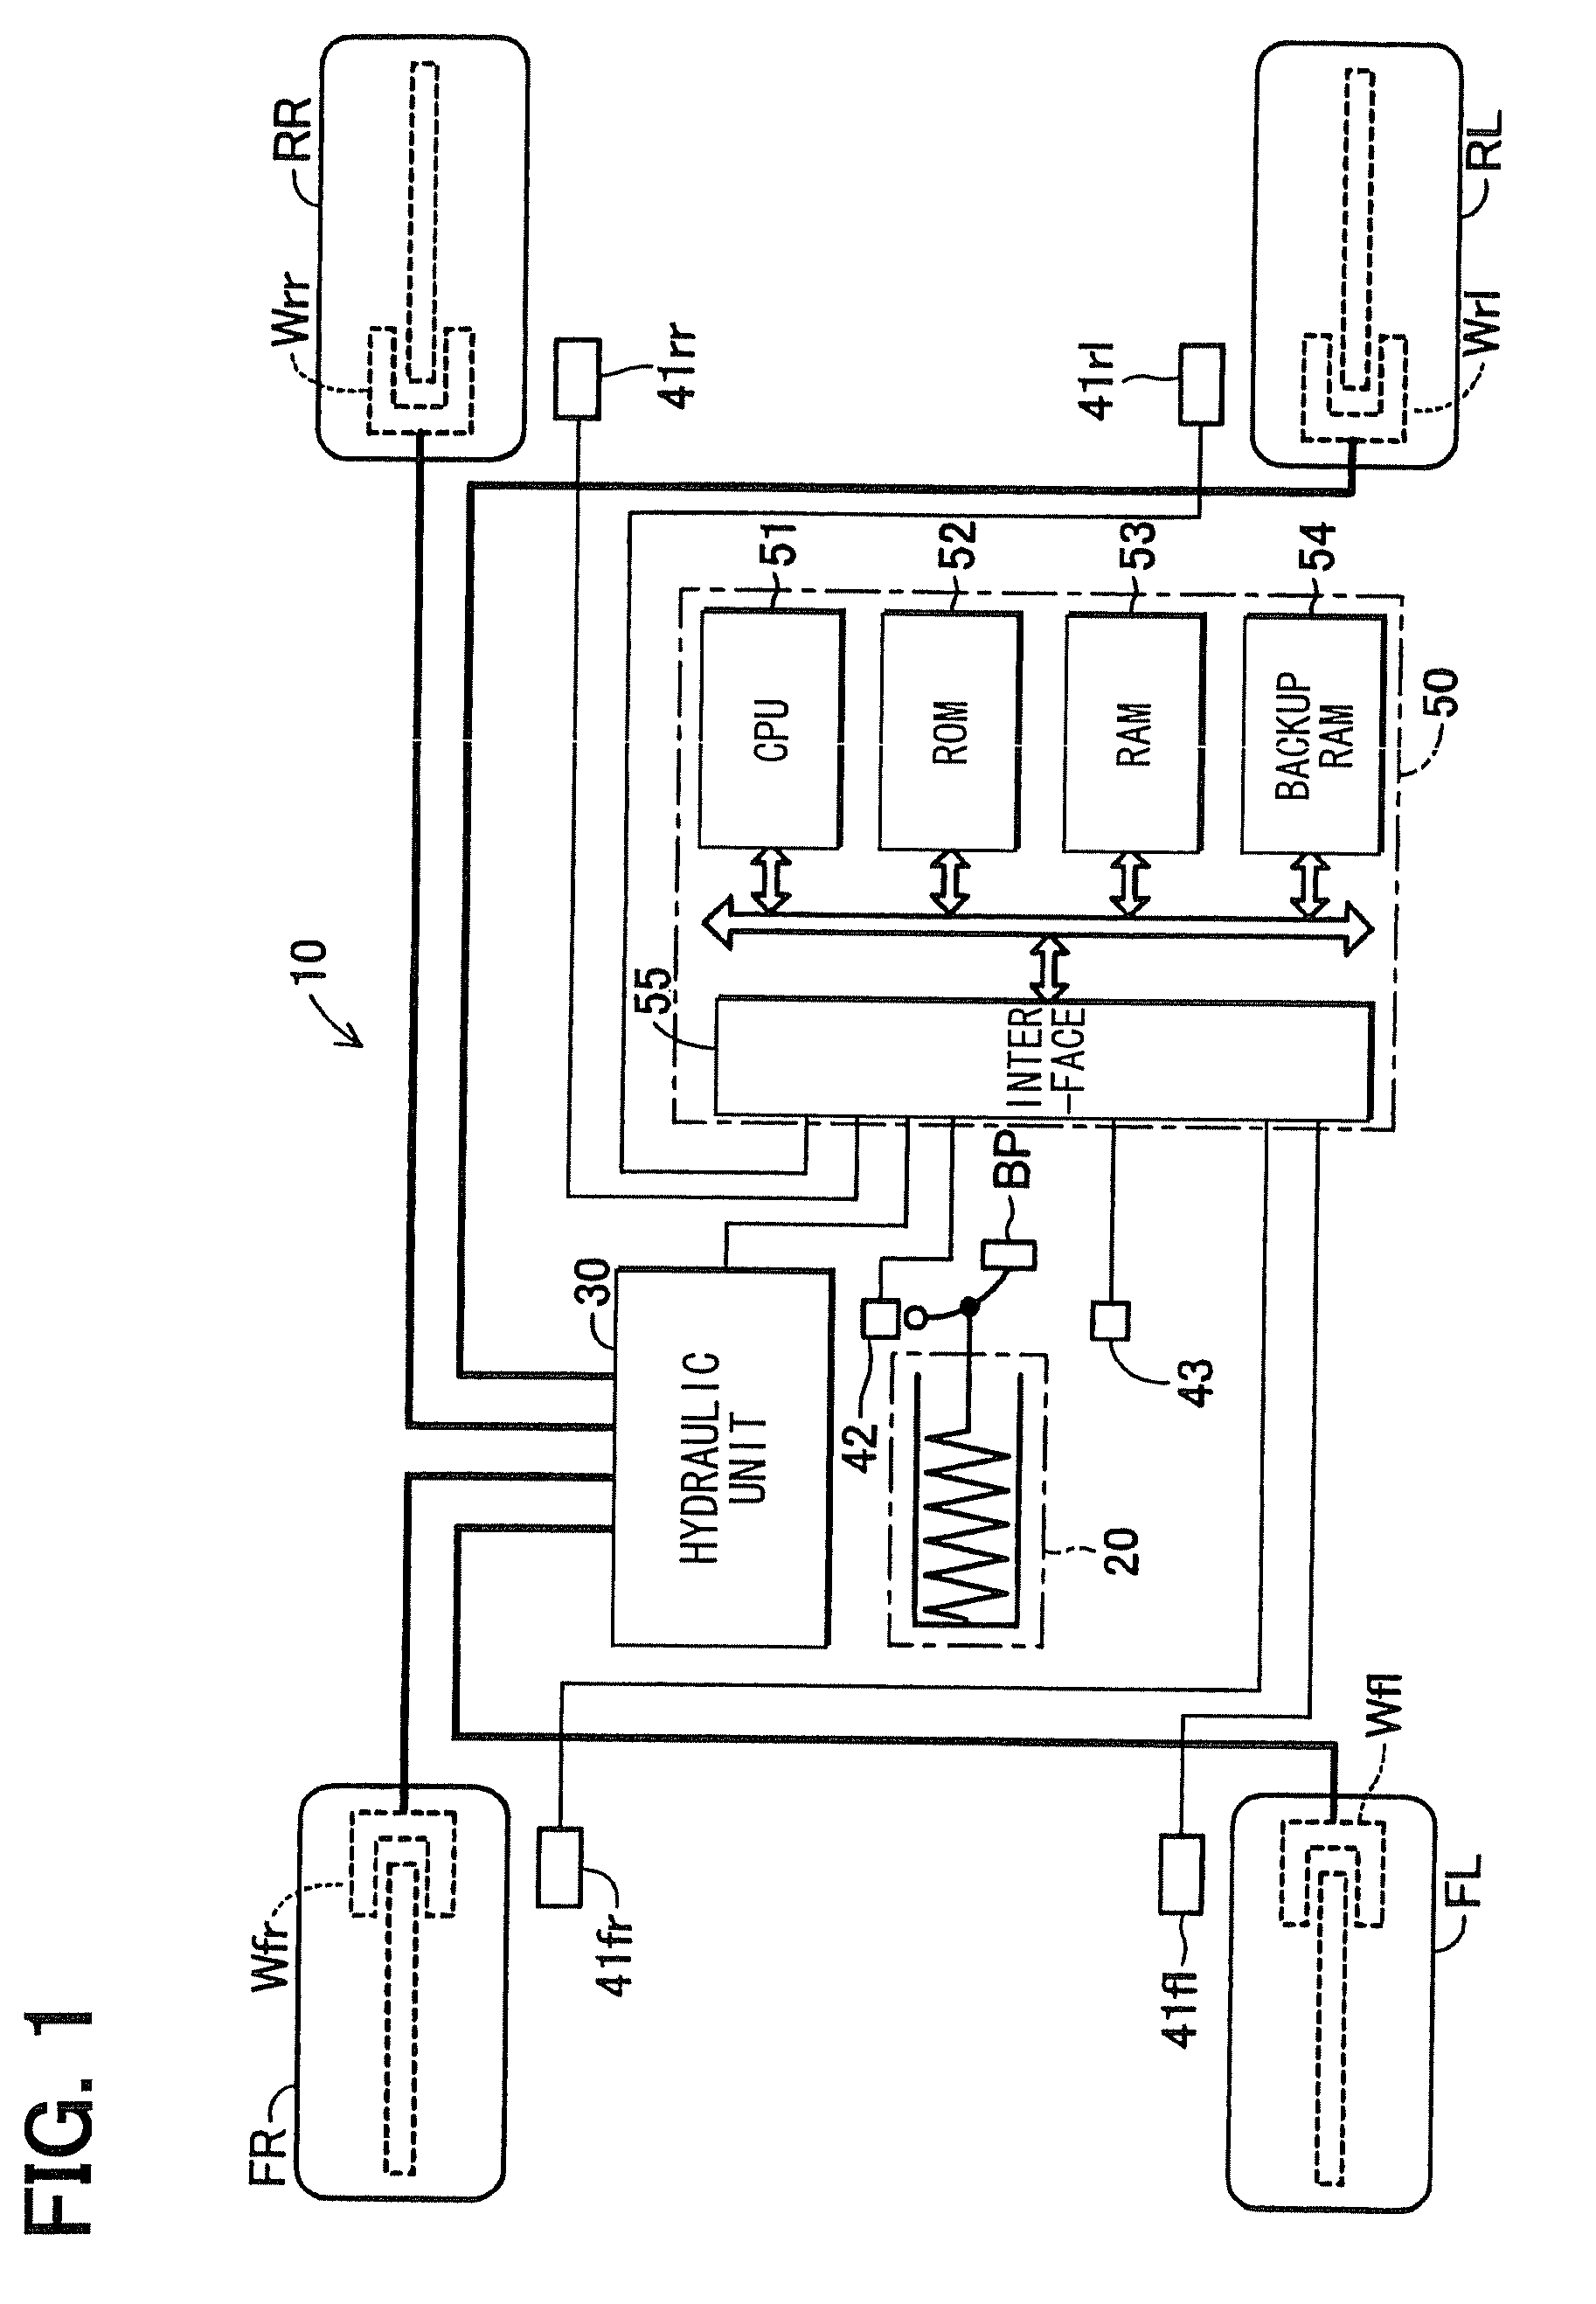 Motion control system for vehicle